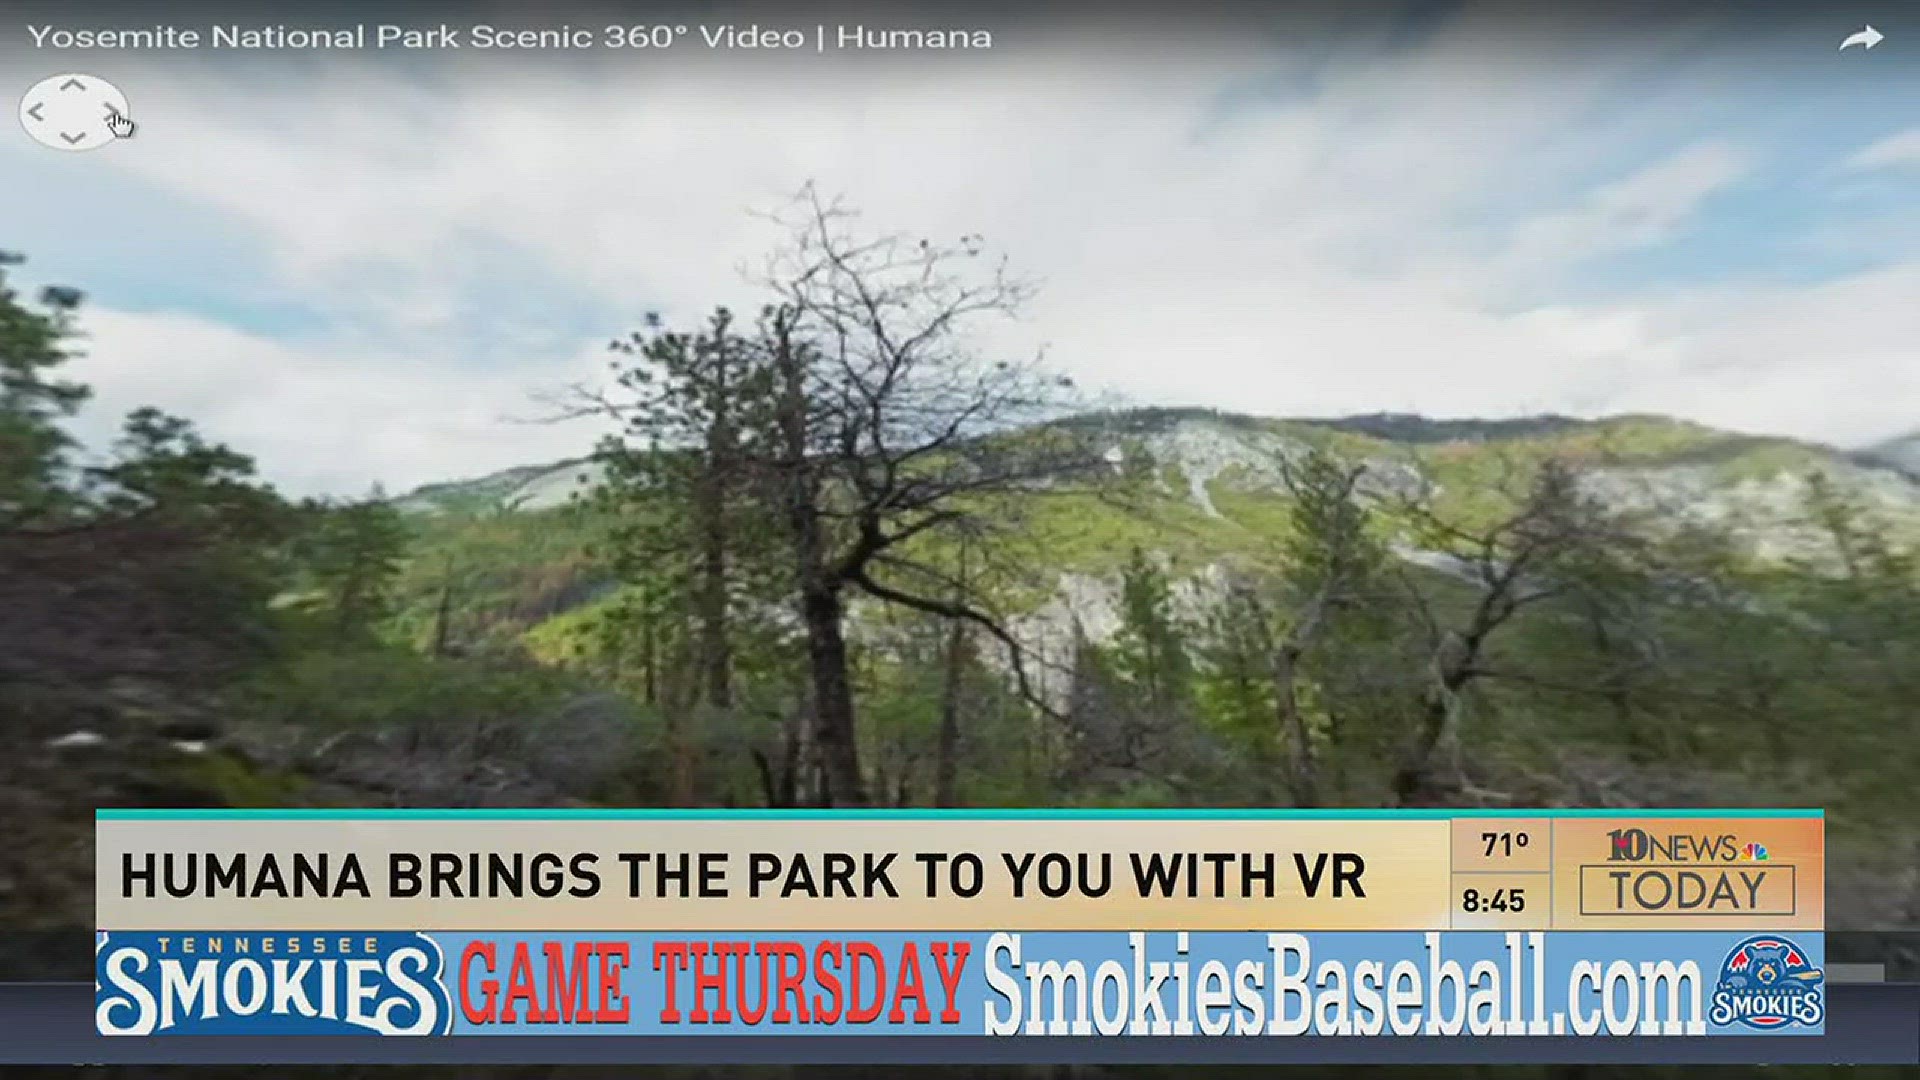 There will be a VR tour of the National Parks sponsored by Humana Monday on Western Avenue.